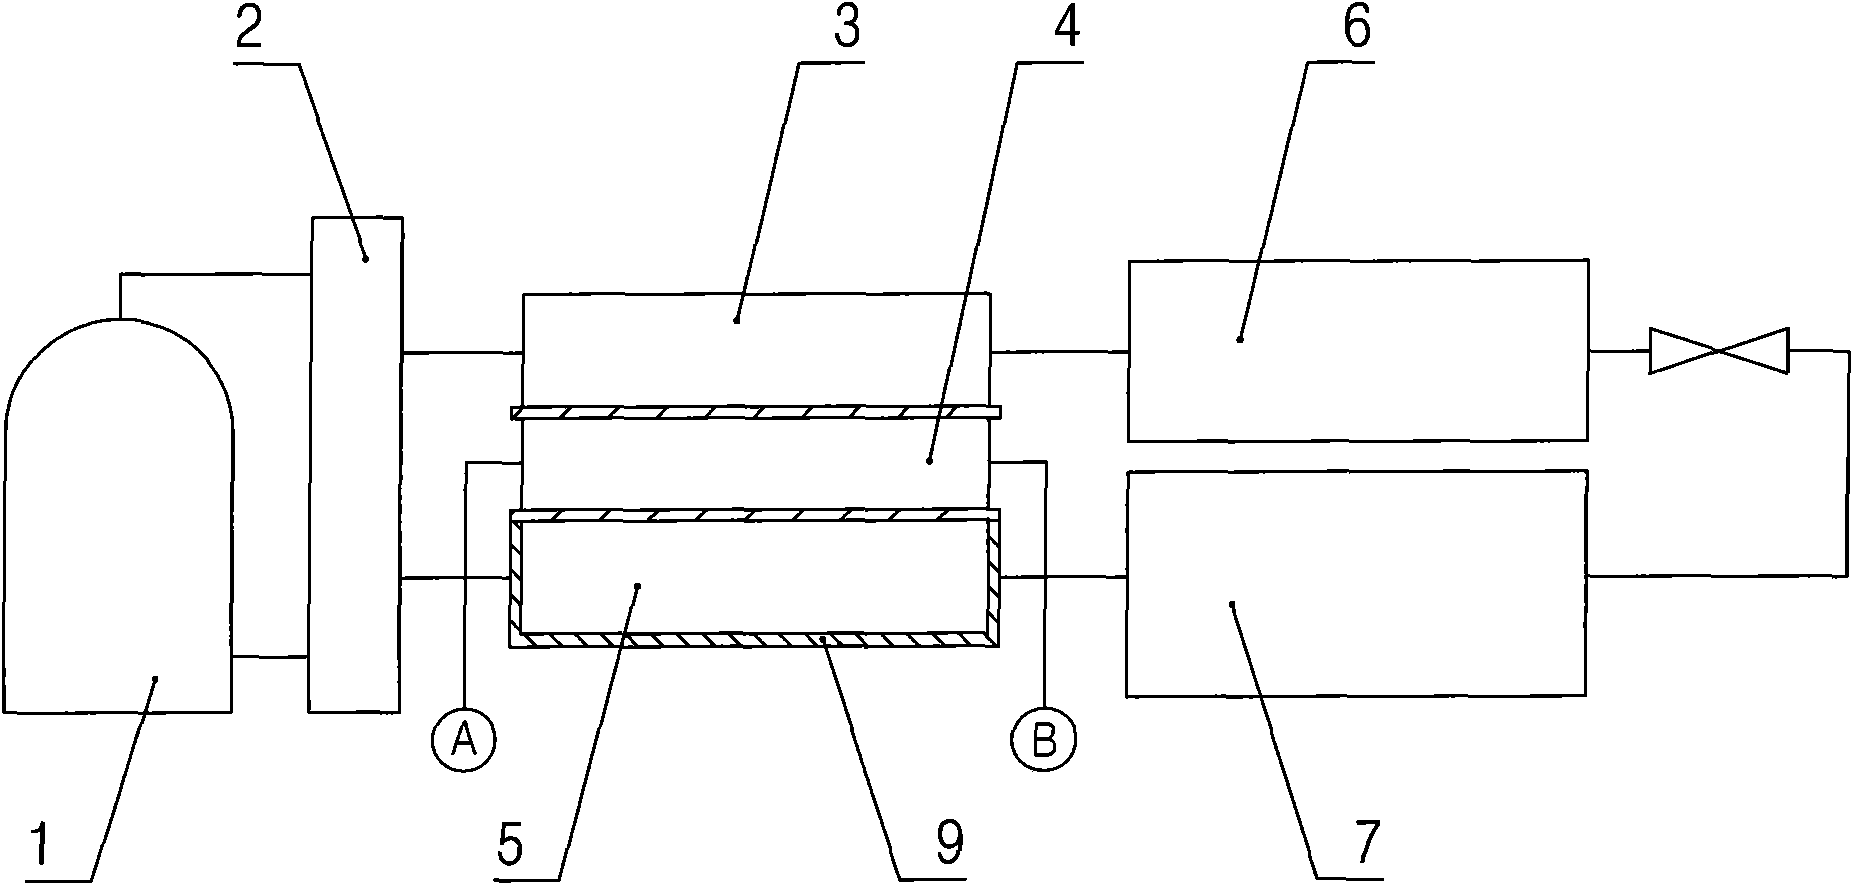 Generating device based on absolute temperature difference of evaporator and condenser in air conditioner and refrigerator